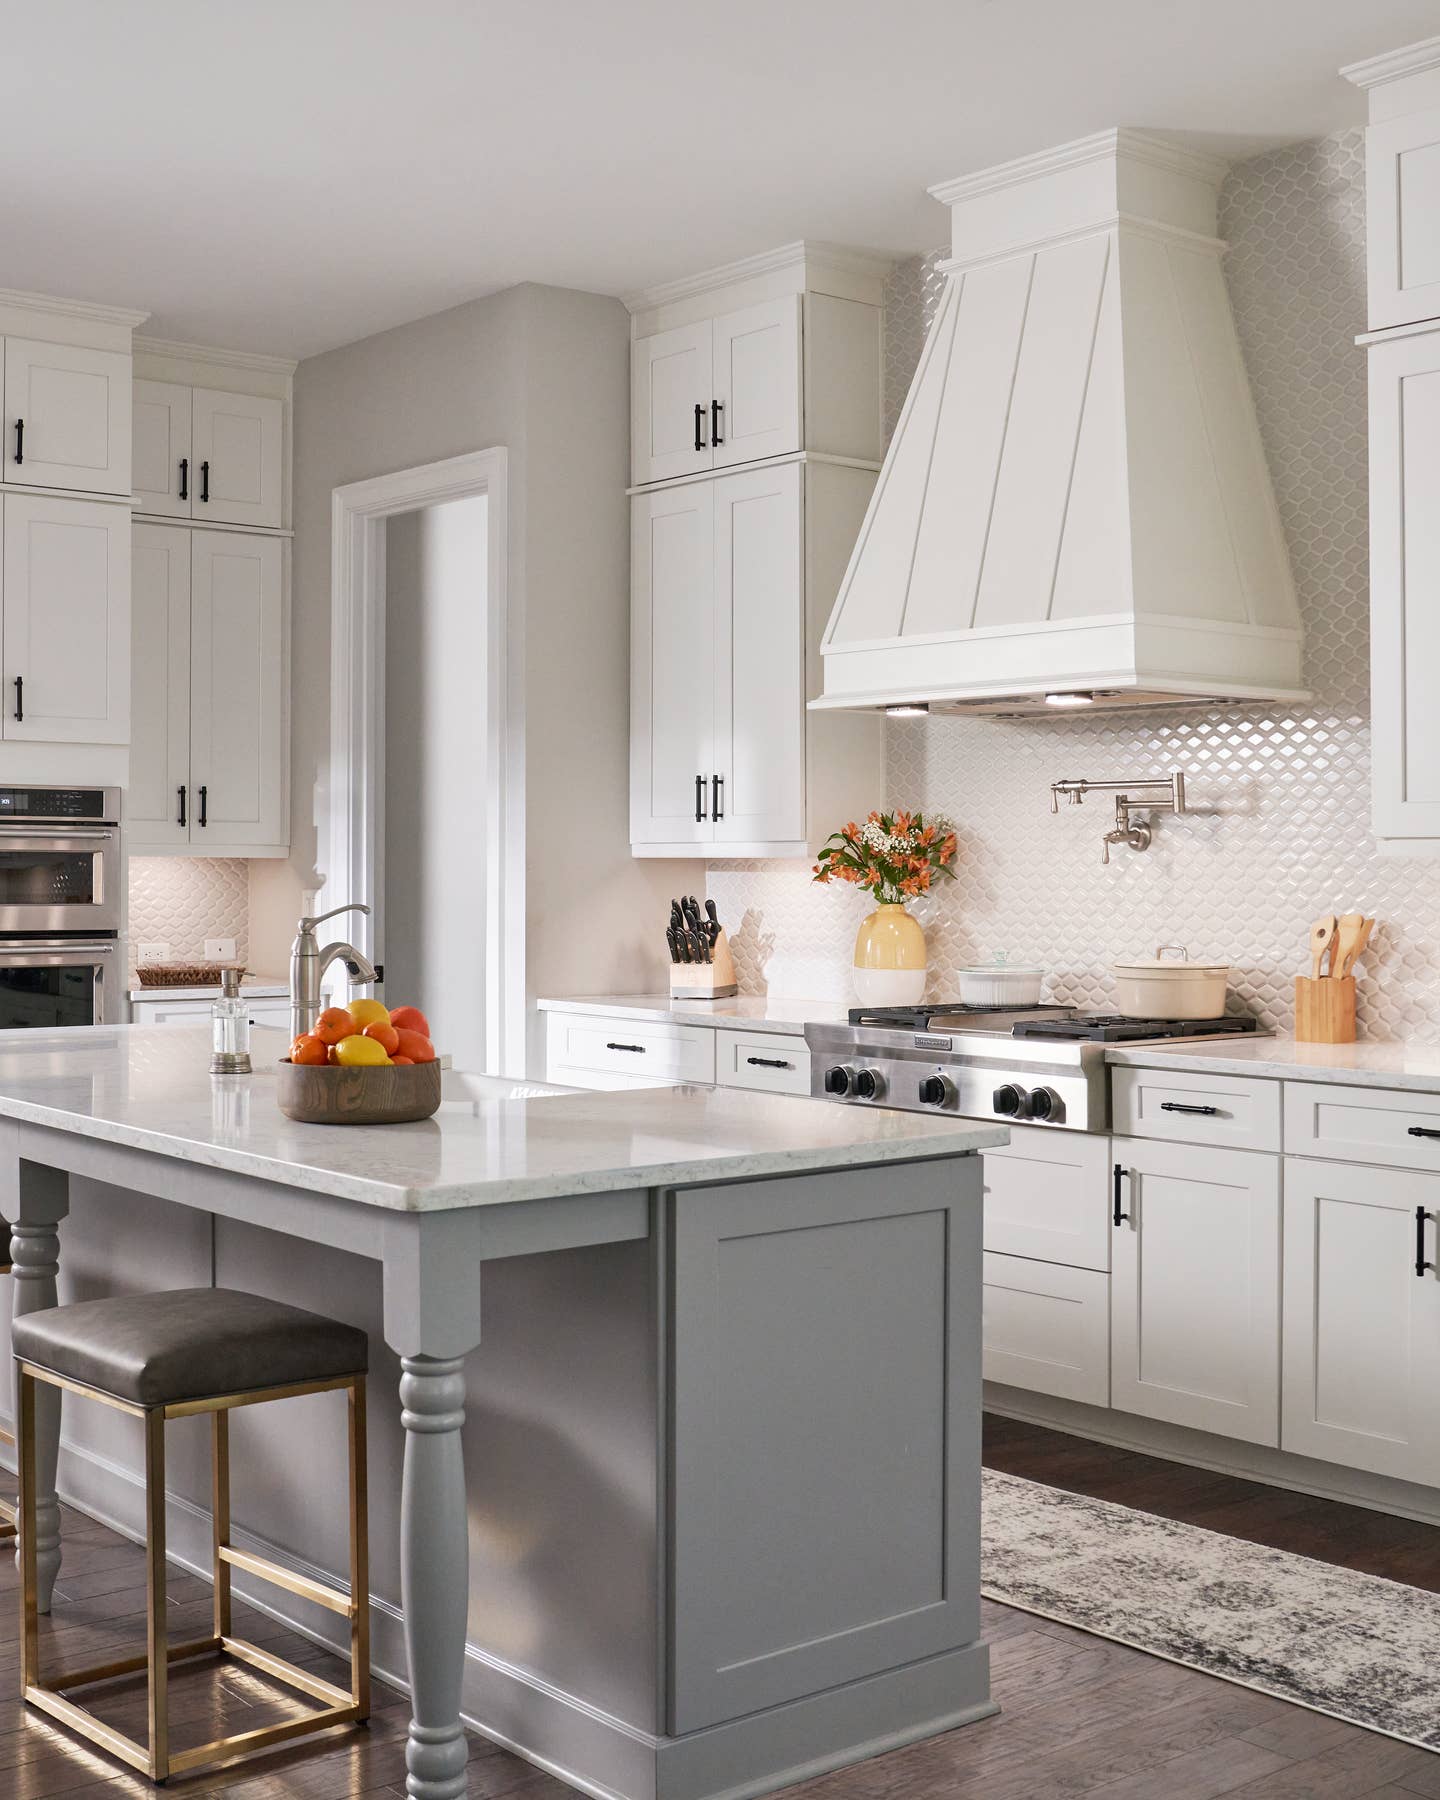 5 Kitchen Remodel Secrets That’ll Help You Create Your Dream Space